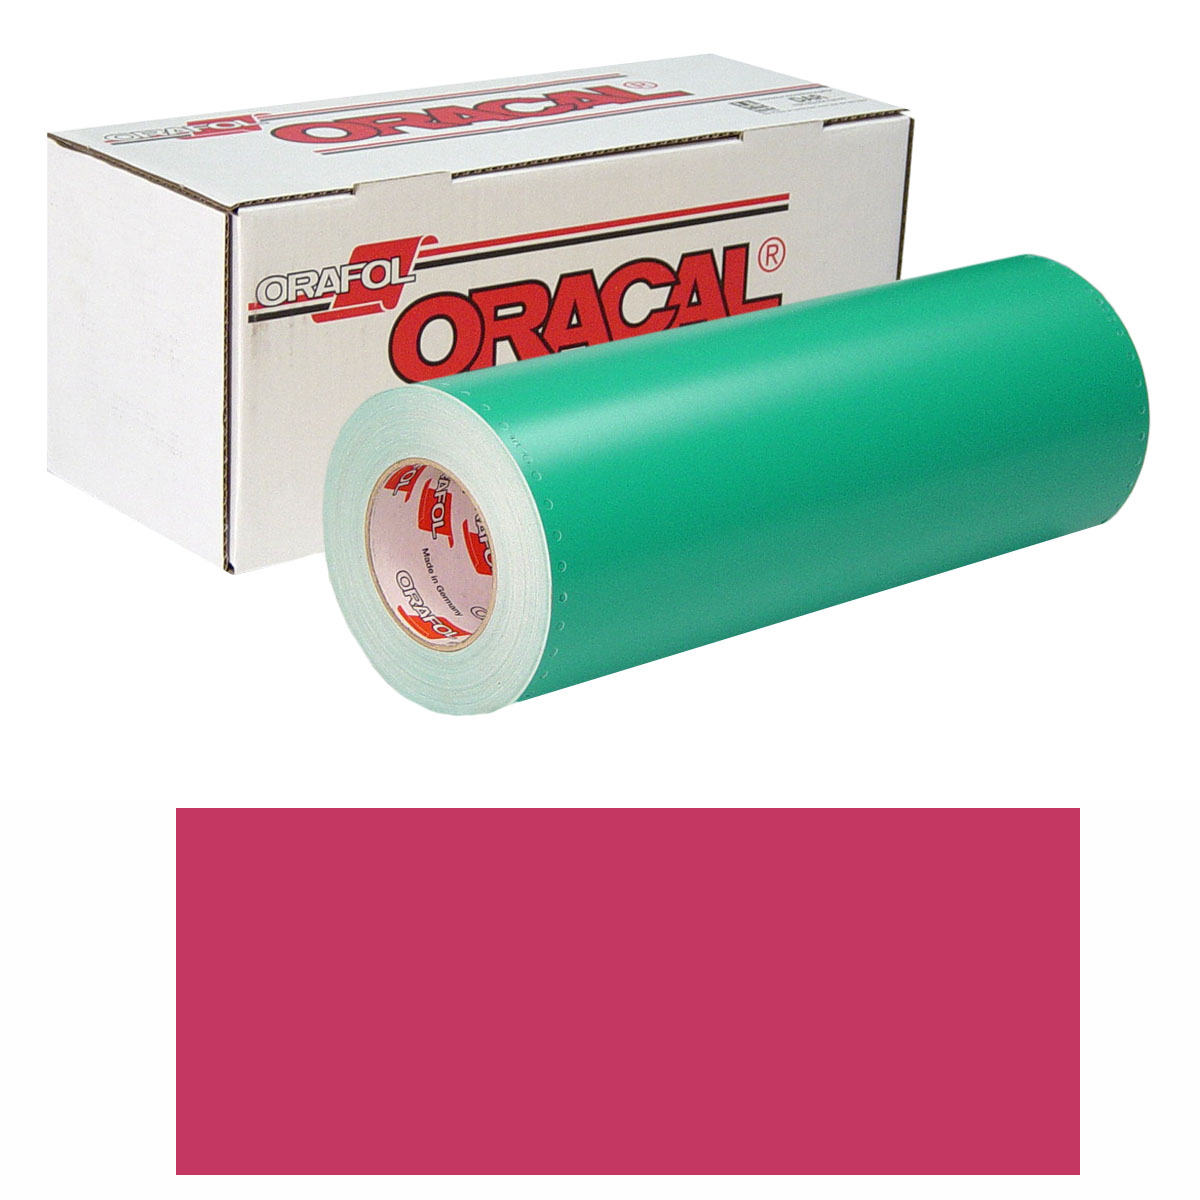 ORACAL 8500 30in X 10yd 031 Red